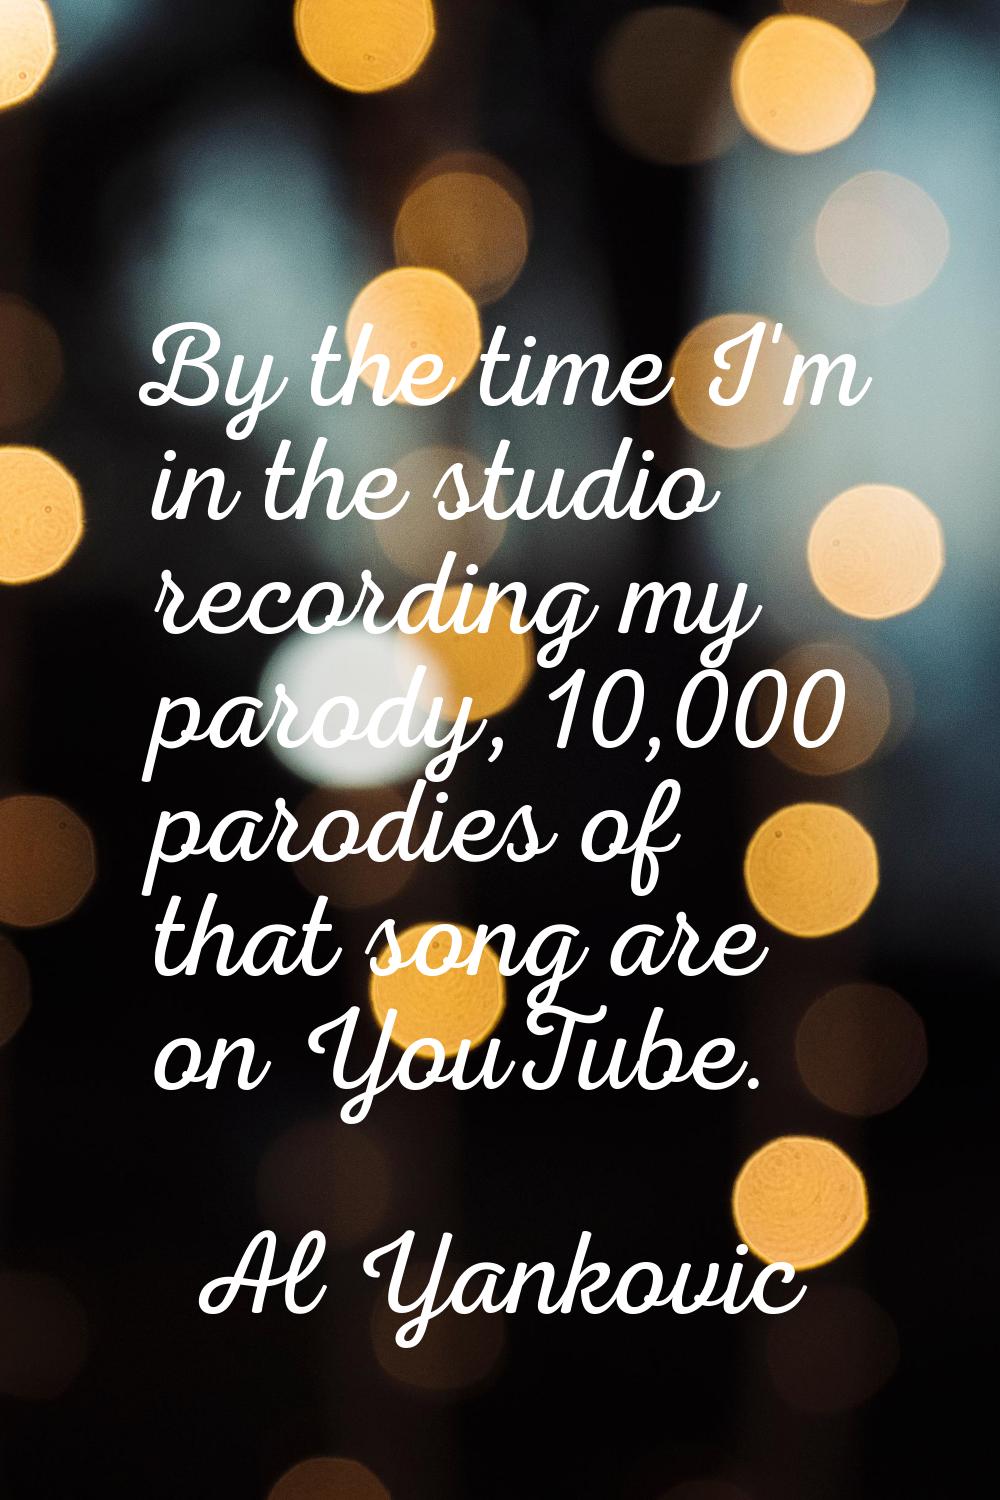 By the time I'm in the studio recording my parody, 10,000 parodies of that song are on YouTube.